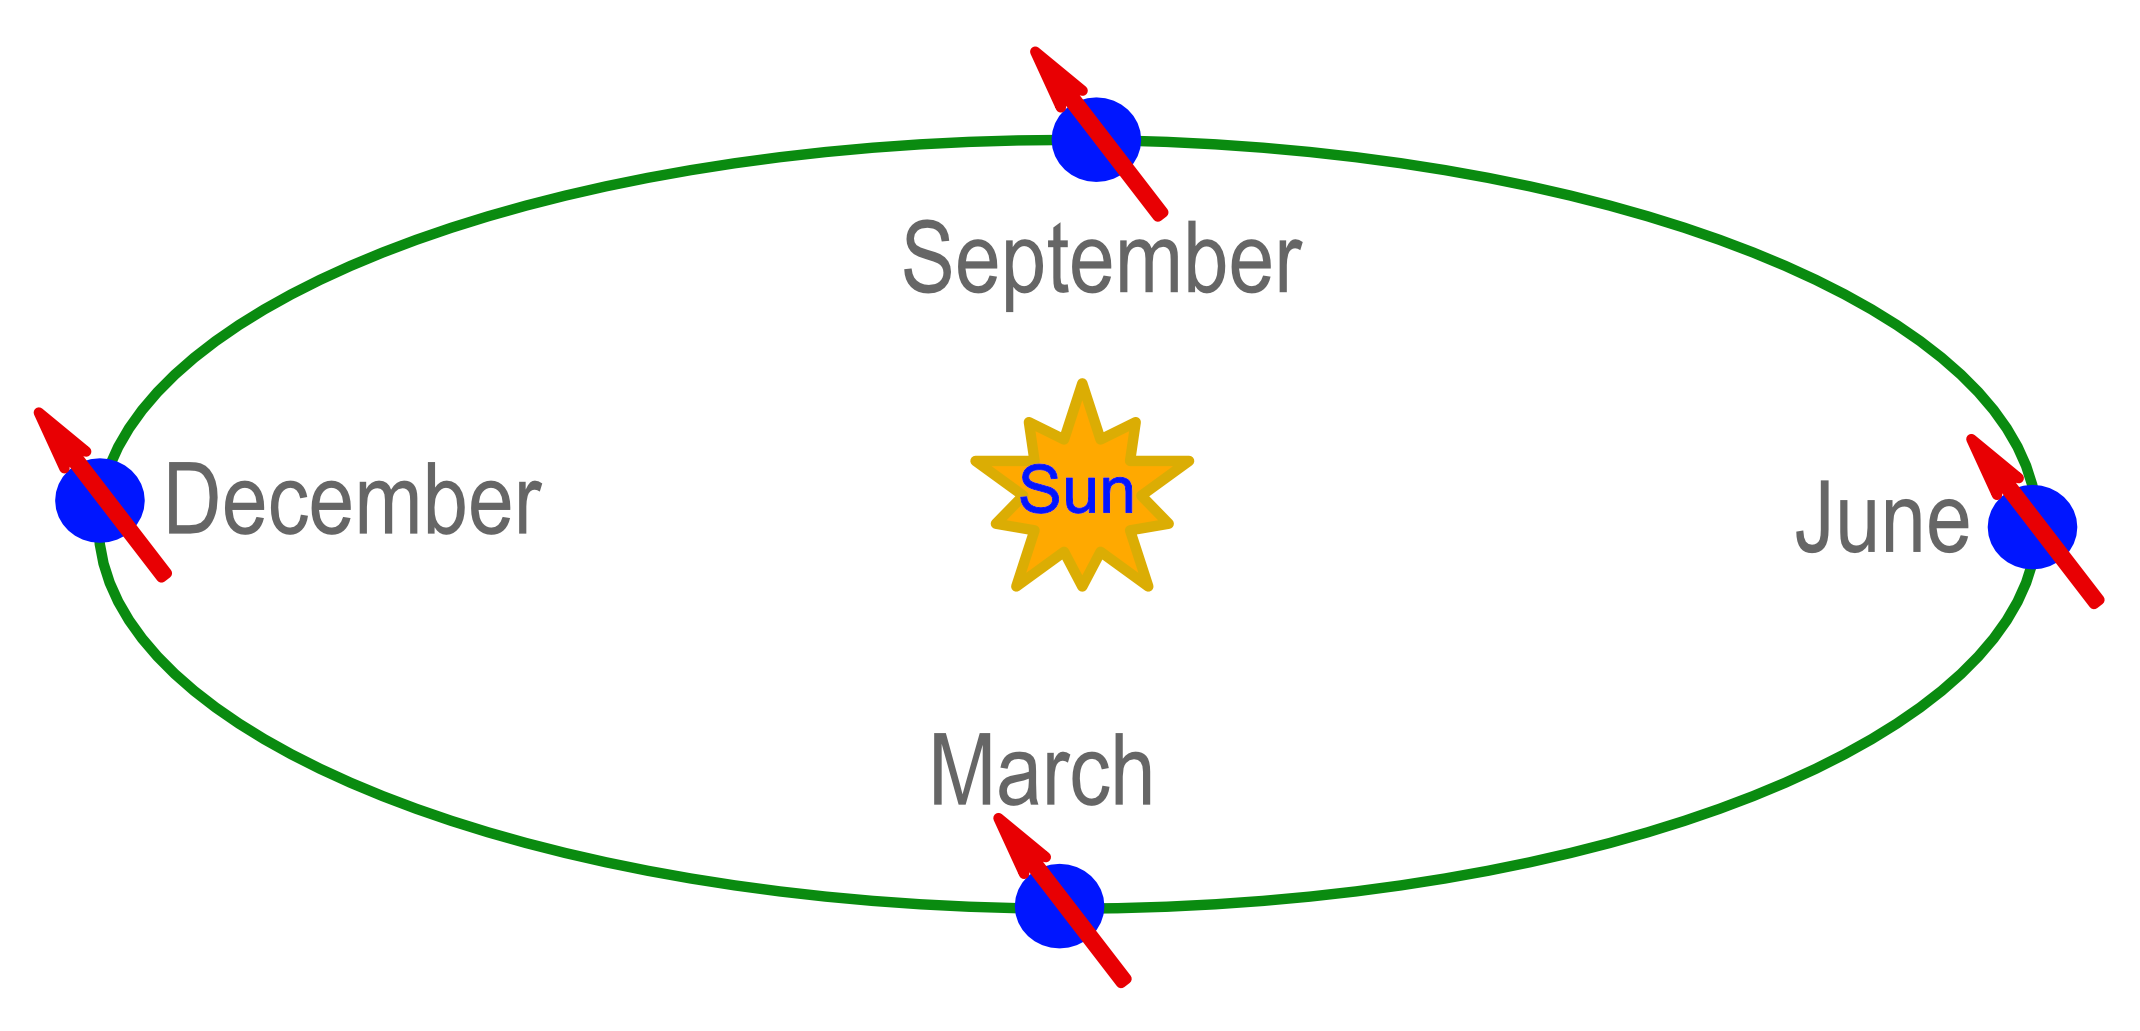 Earth orbit from above the Sun, with ecliptic constellations indicated.